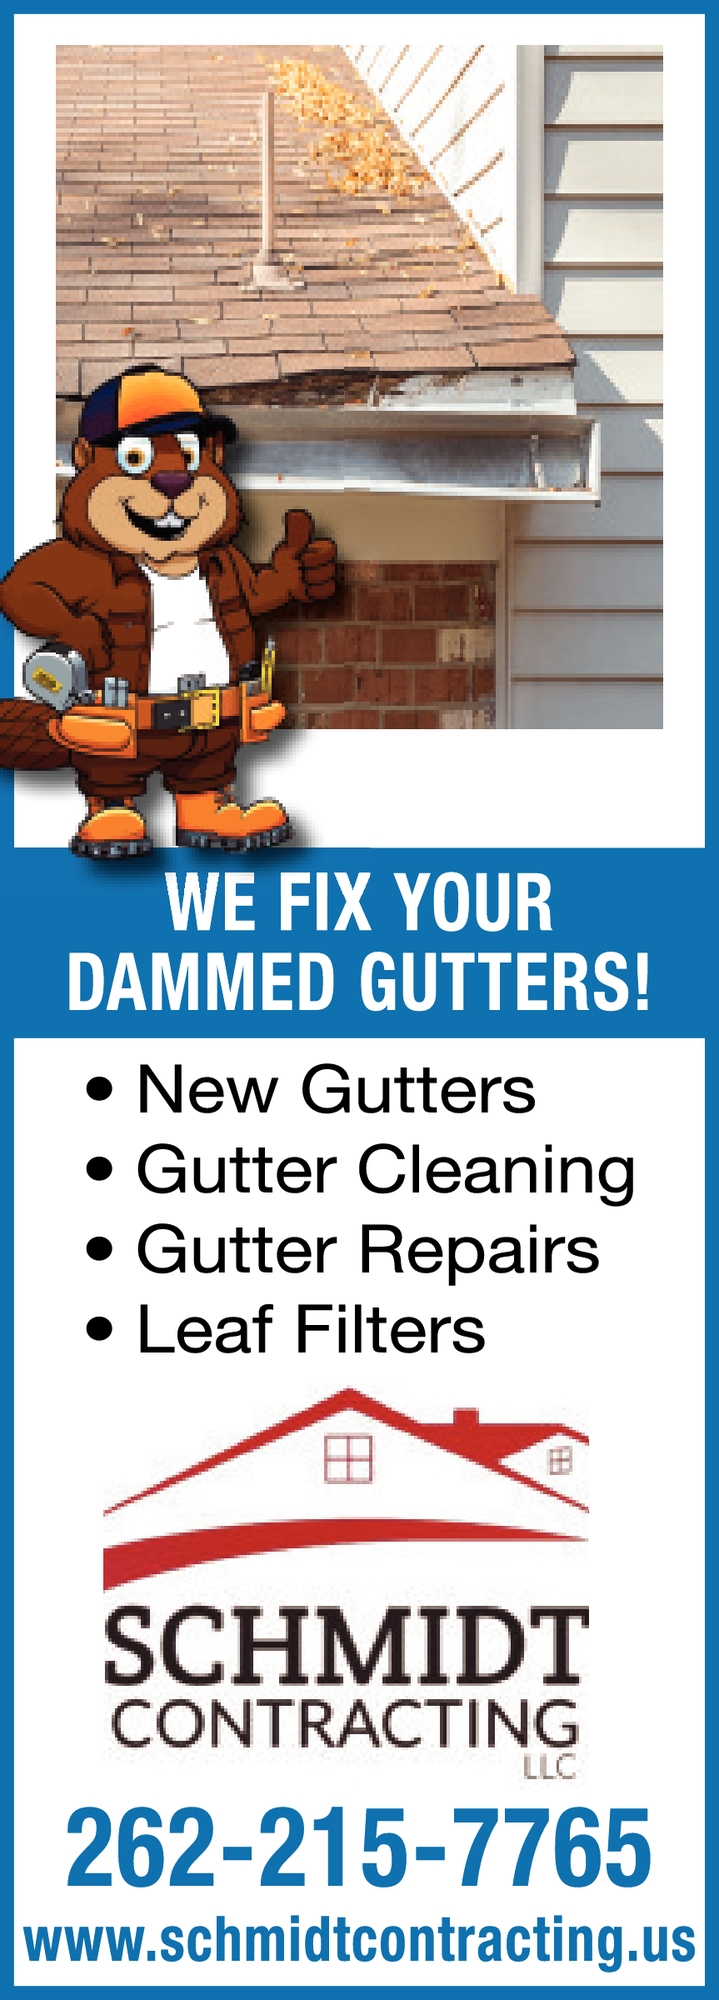 We Fix Your Dammed Gutters!